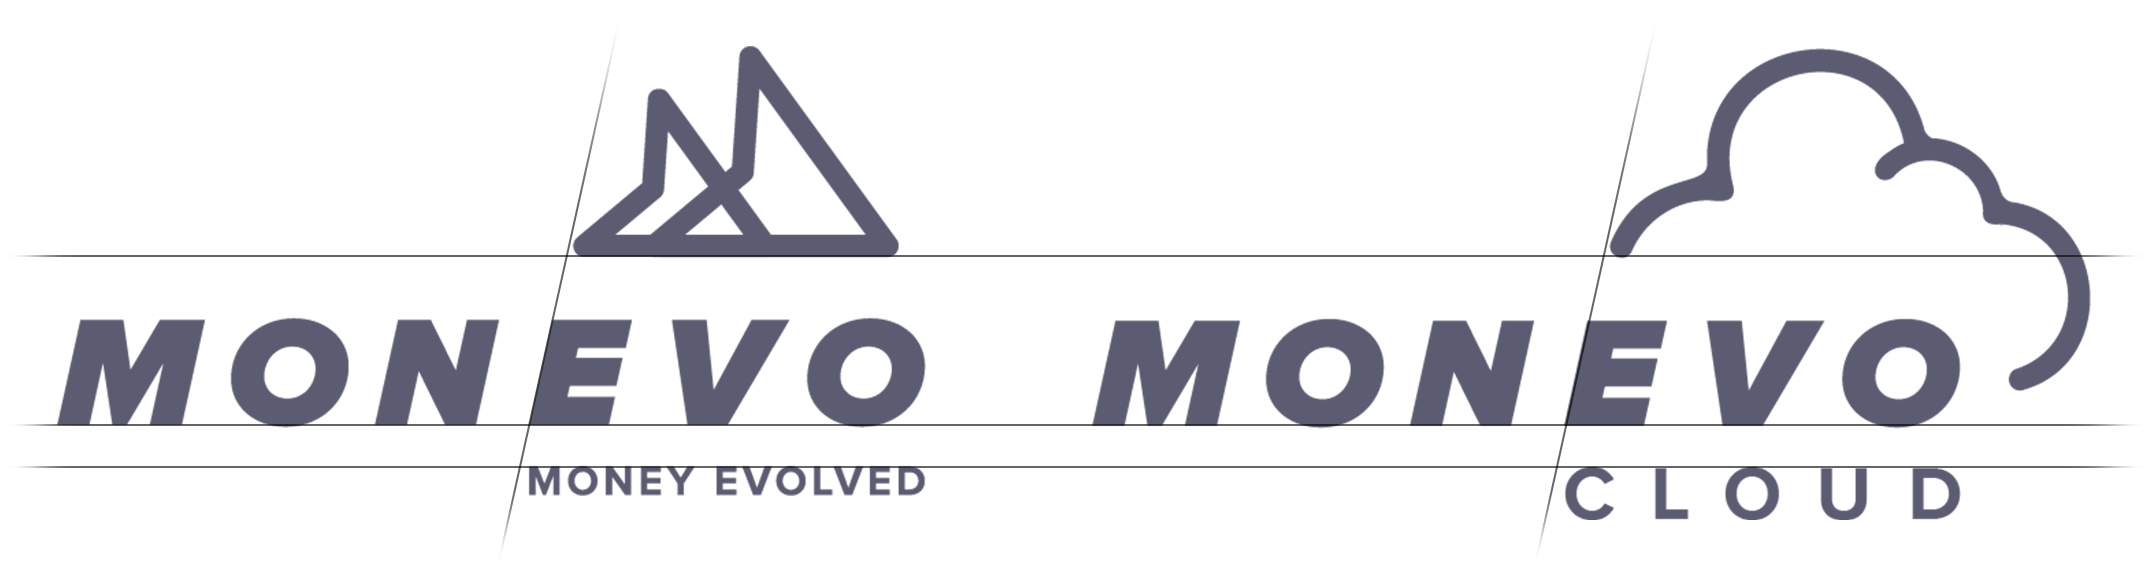 Forming the new Monevo Cloud logo